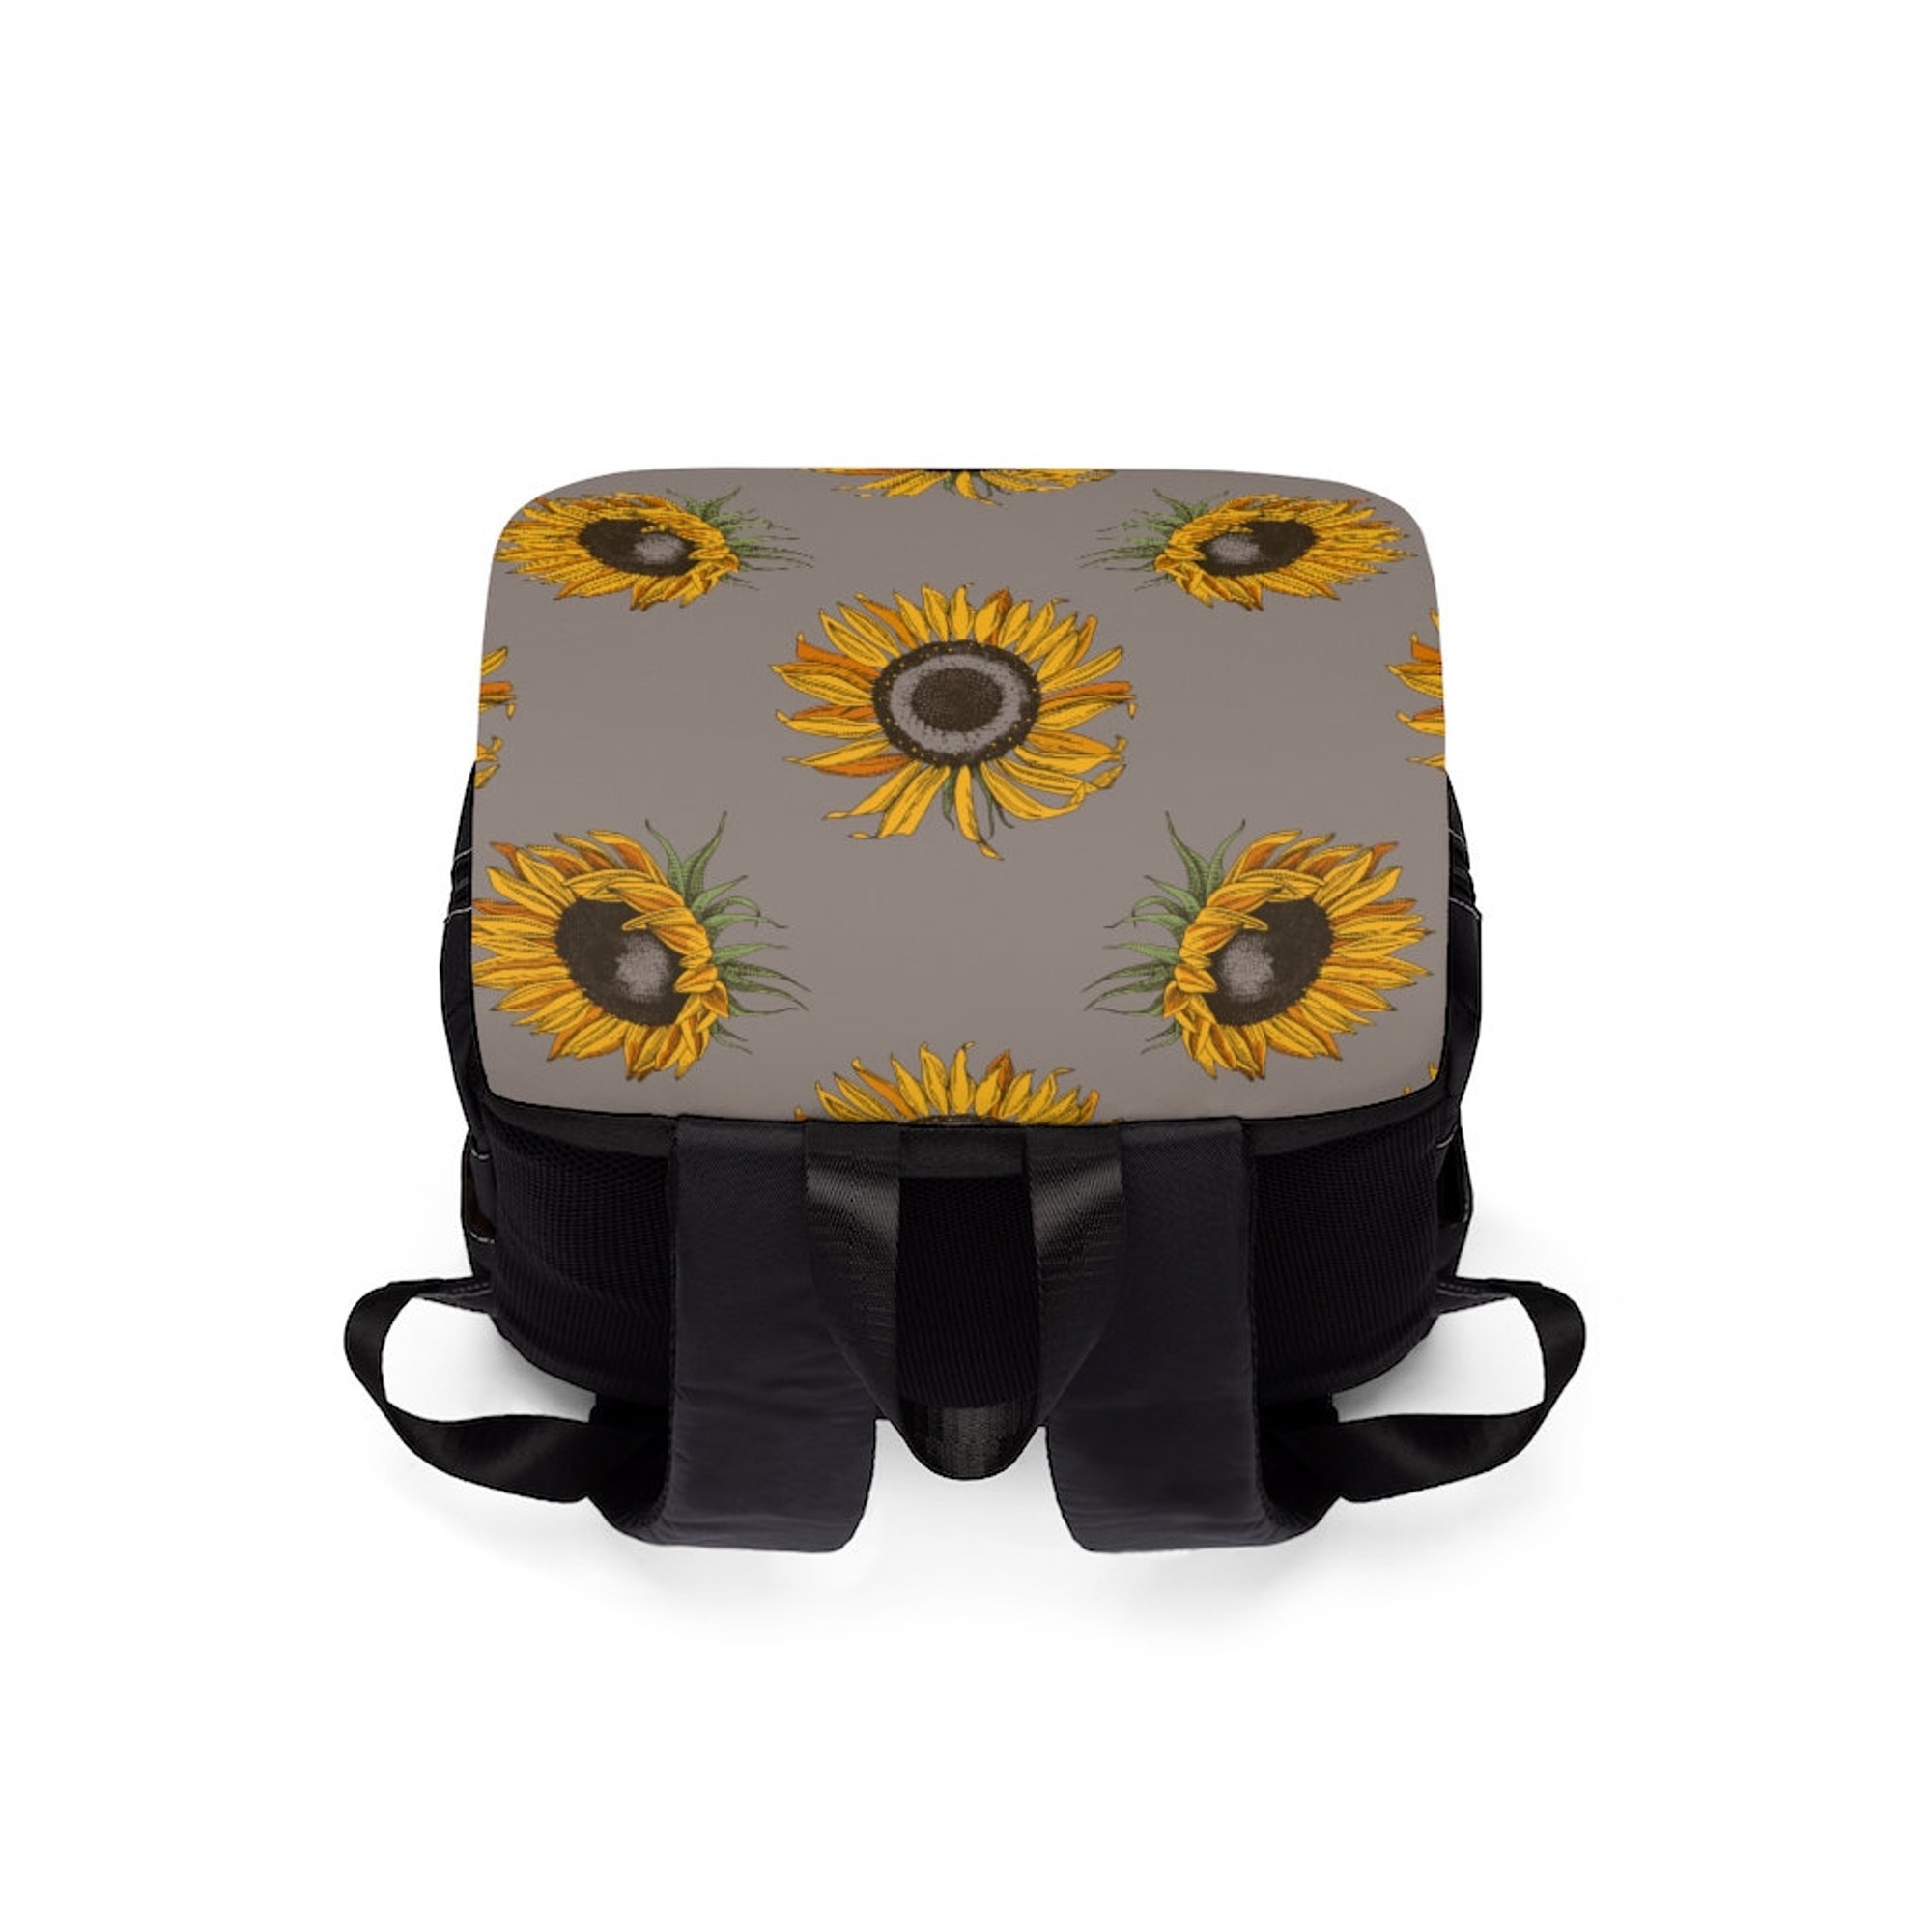 Sunflowers Unisex Casual Shoulder Backpack